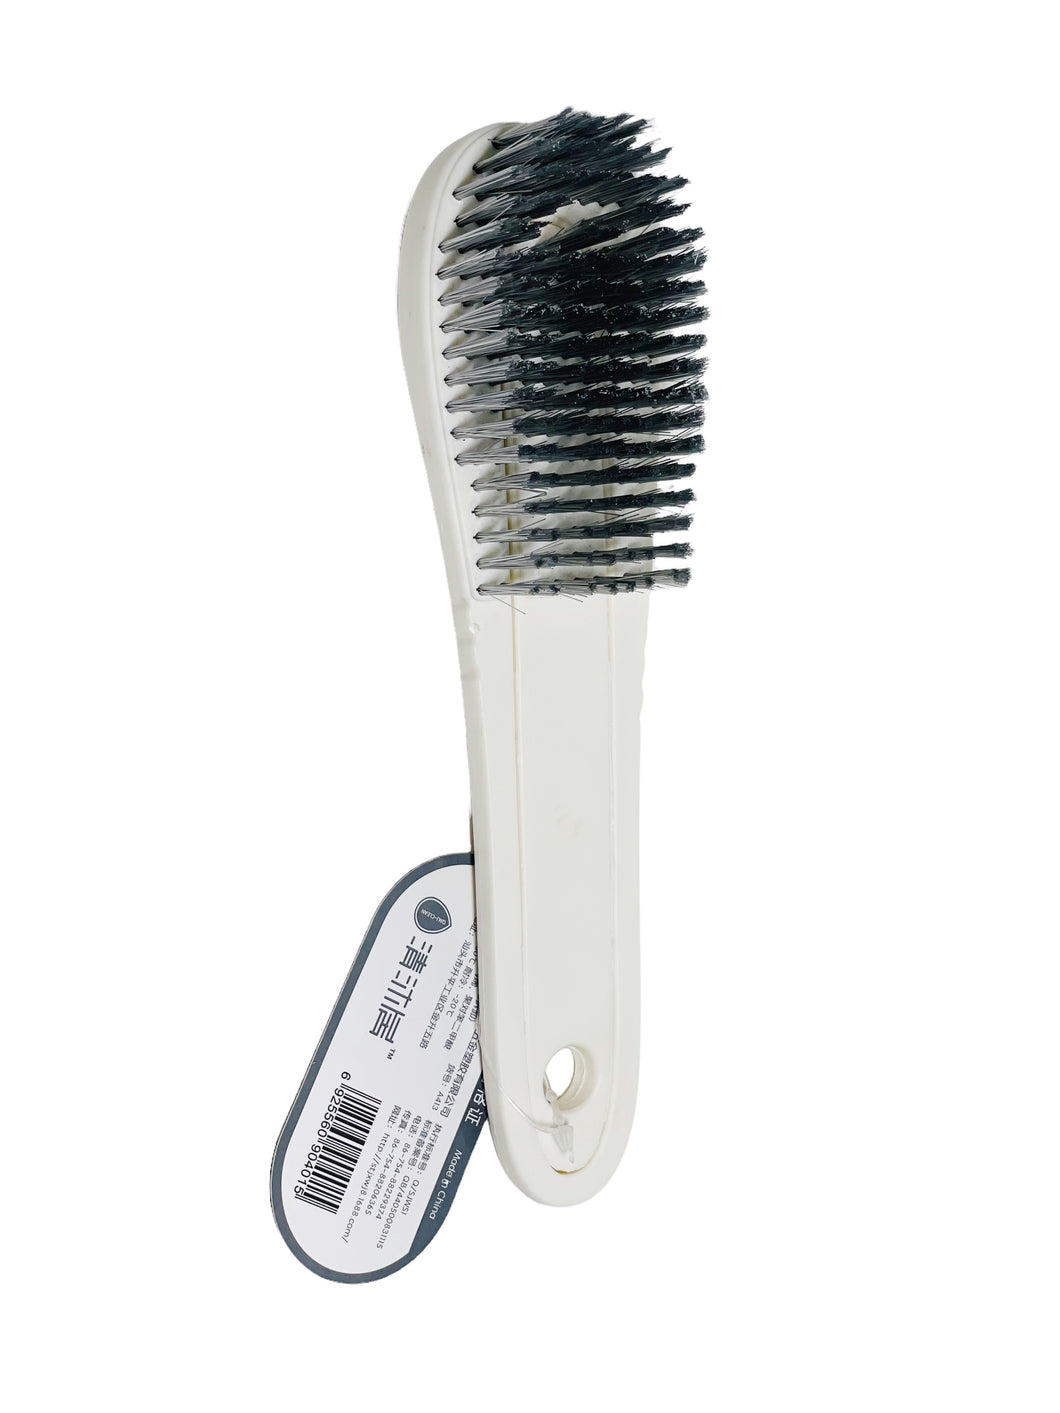 A413 Cleaning Brush 清洁刷